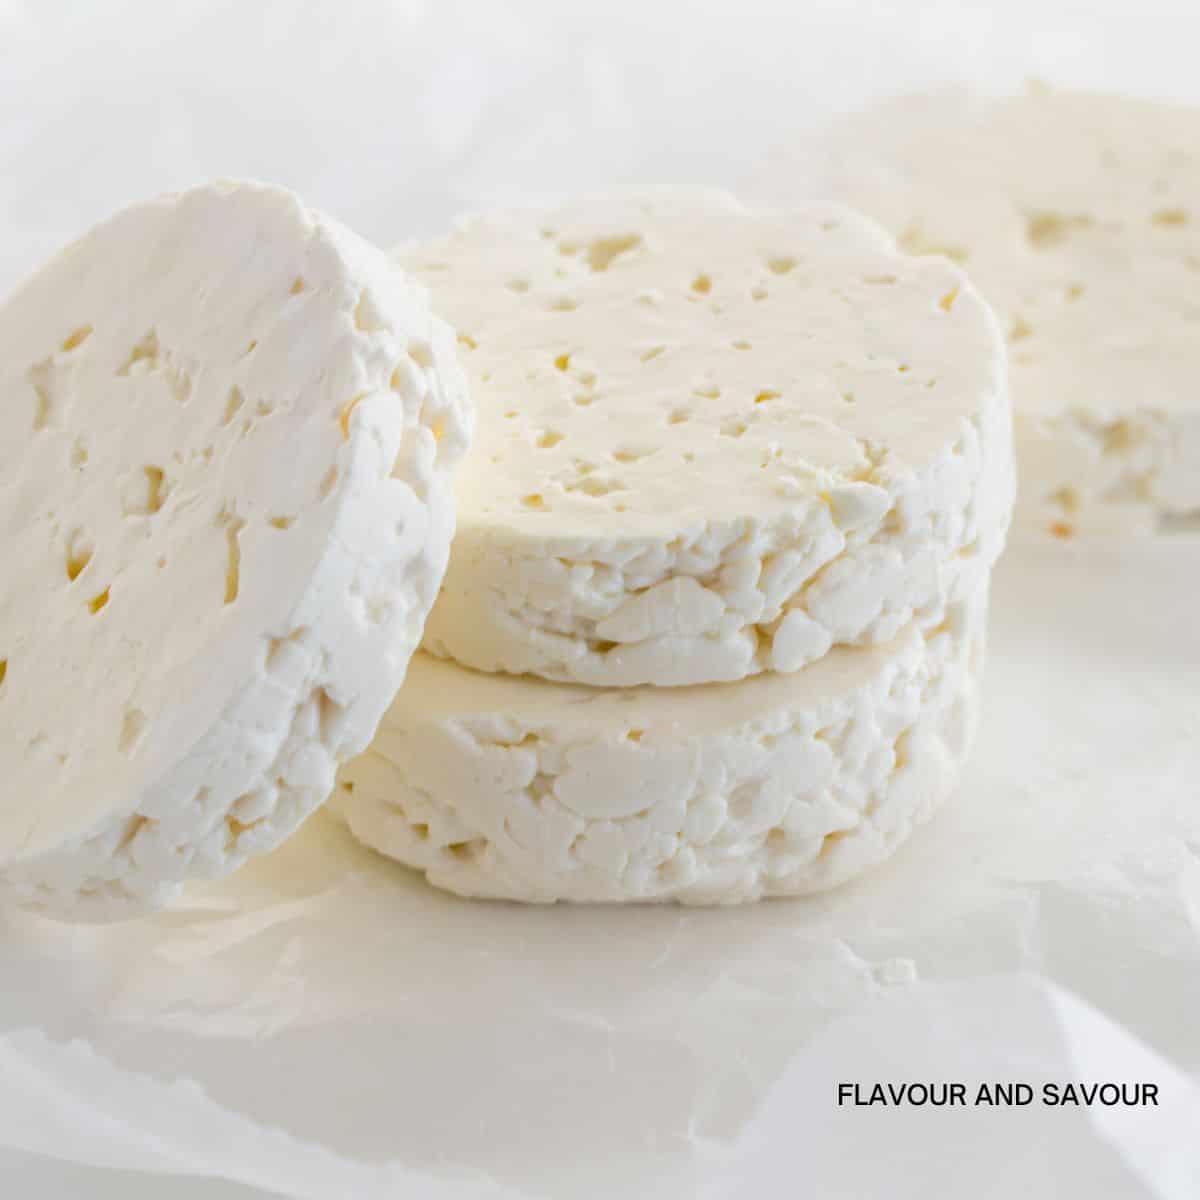 Rounds of feta cheese.